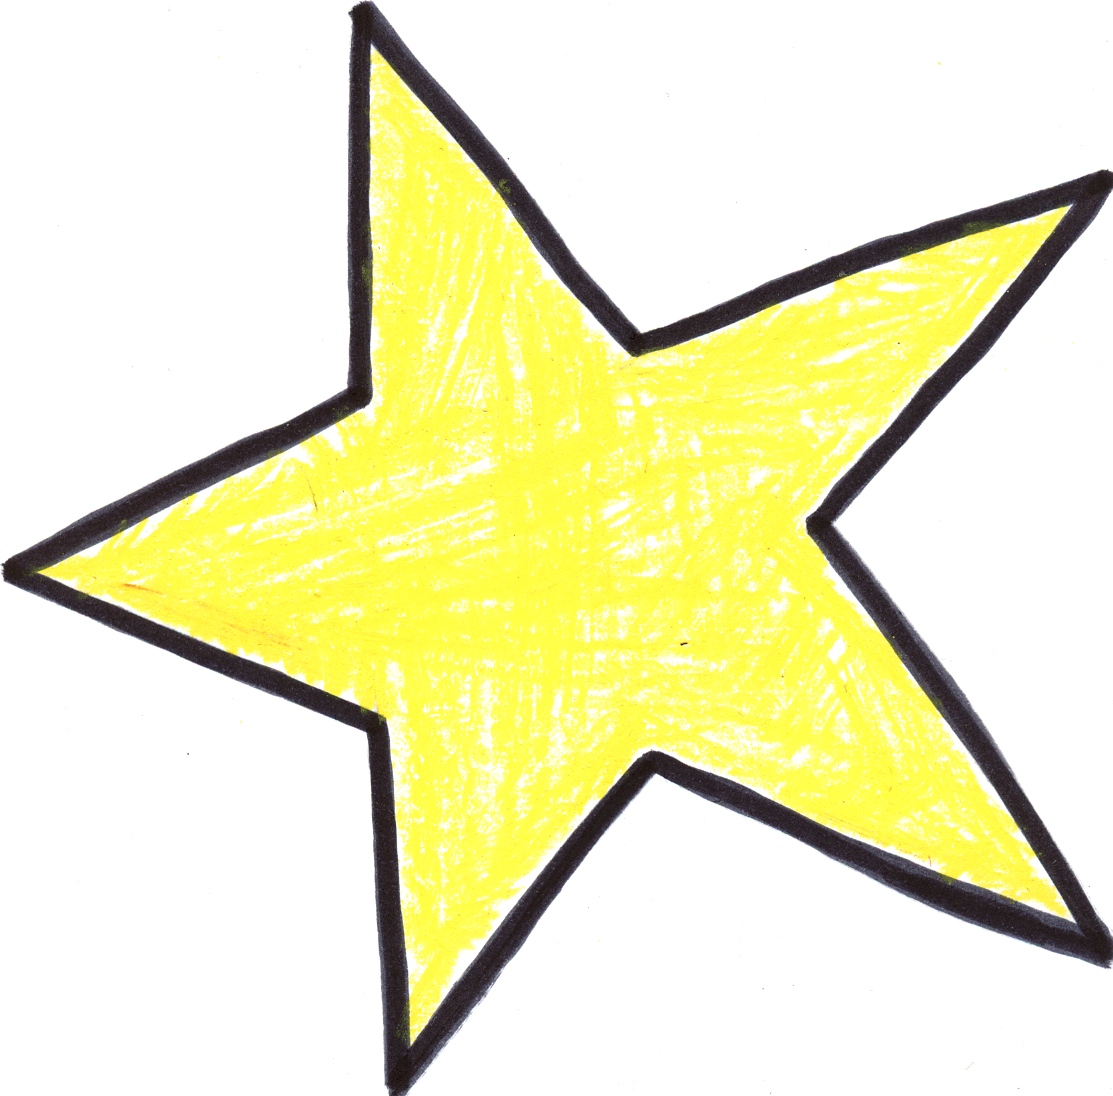 Handdrawn star clipart black and white